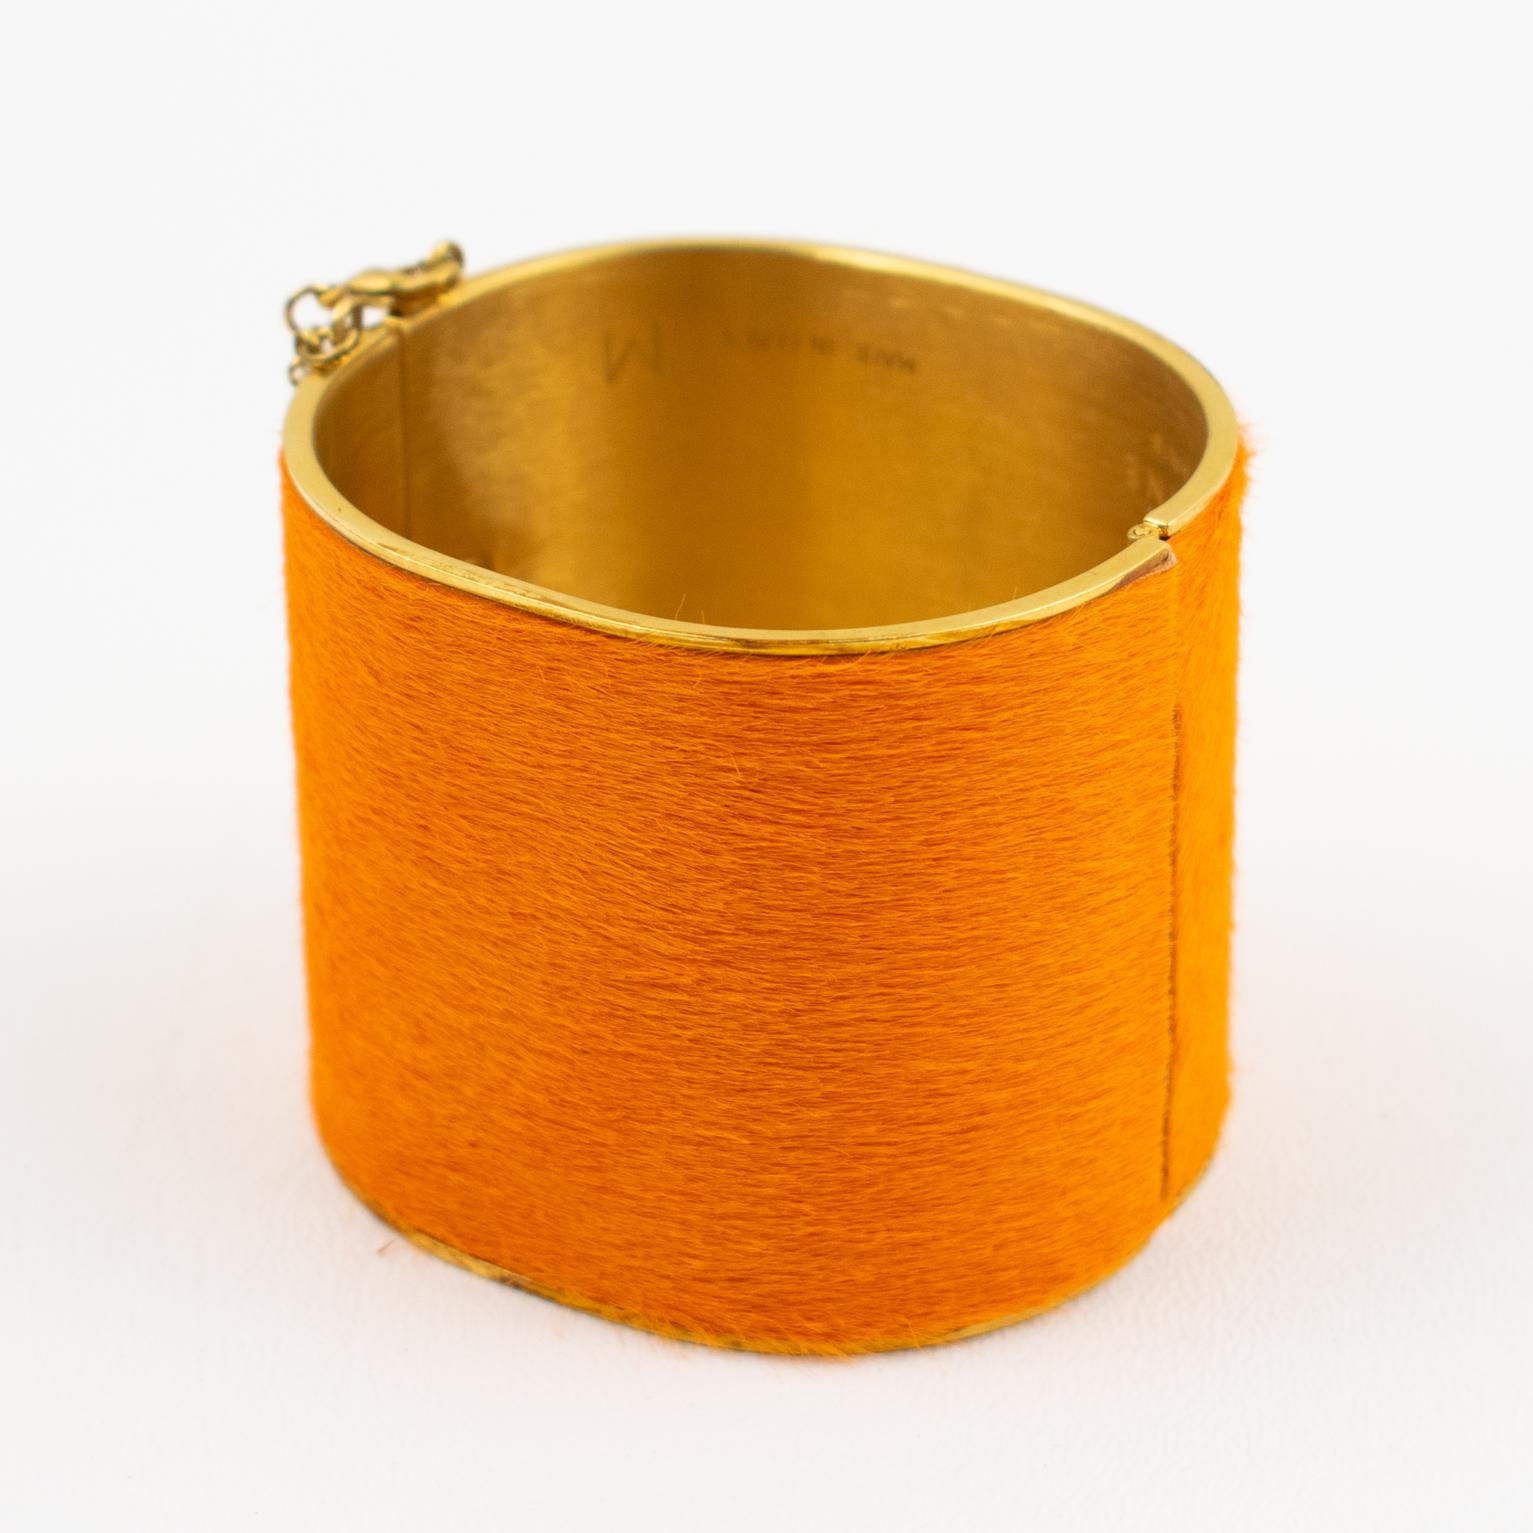 This refined Celine Paris gilt metal clamper bracelet is from the Phoebe Philo Collection. The bangle features an oversized manchette edge cuff shape with orange pony calfskin. The hinge push clasp closure has a security chain. The bracelet is